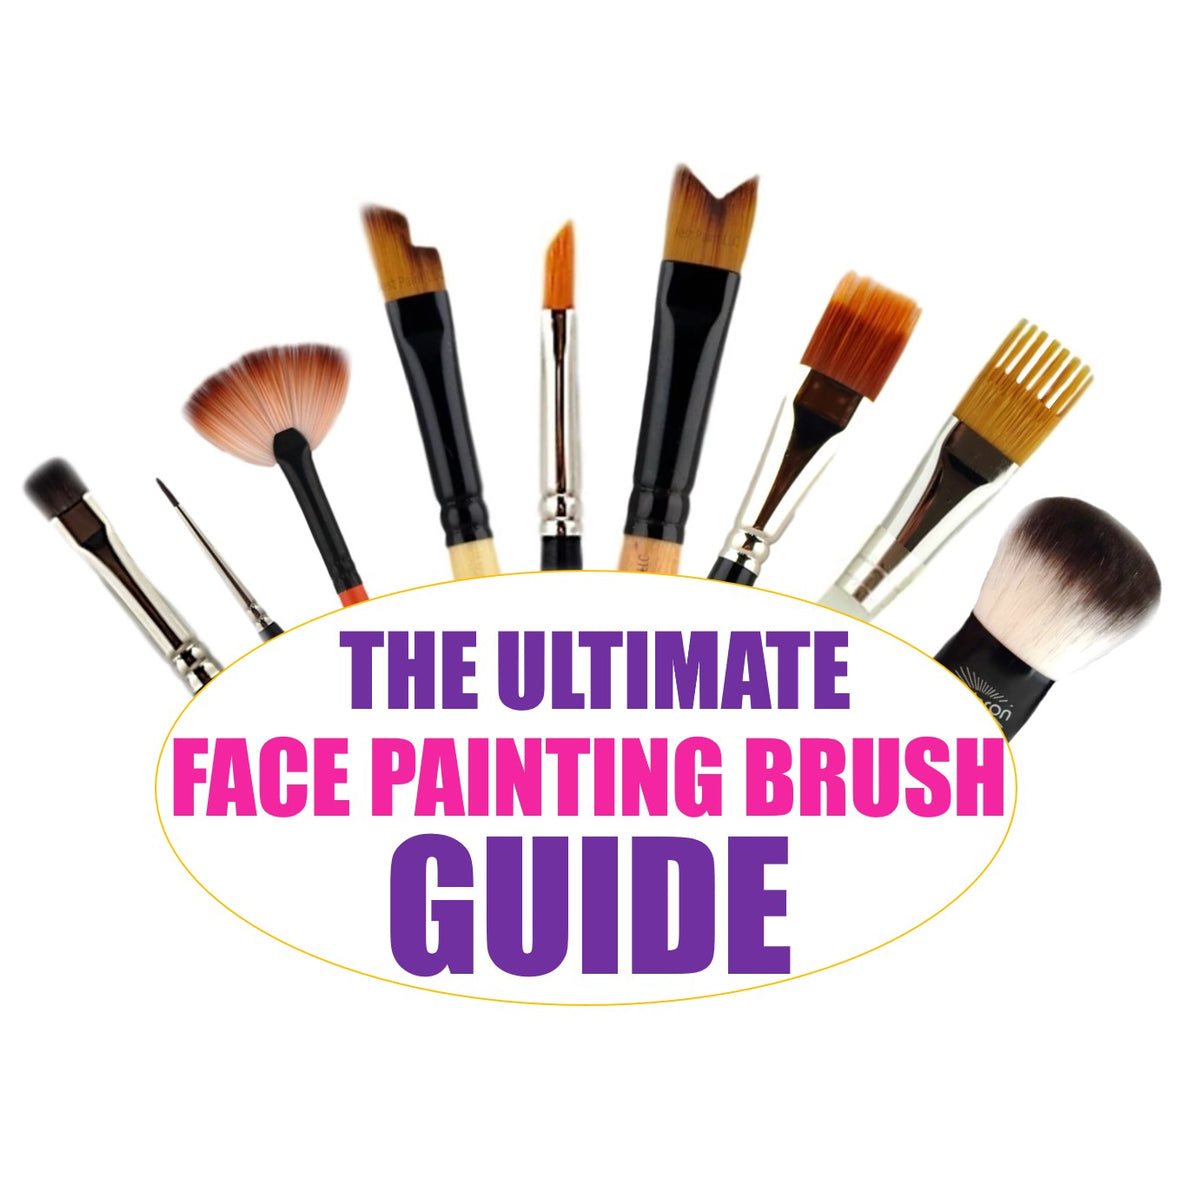 The Ultimate Rinse Cup is a 3-in-1 tool that acts as a rinse cup, paint  brush holder and palette. Easy assembly means the URC goes where you go,  because